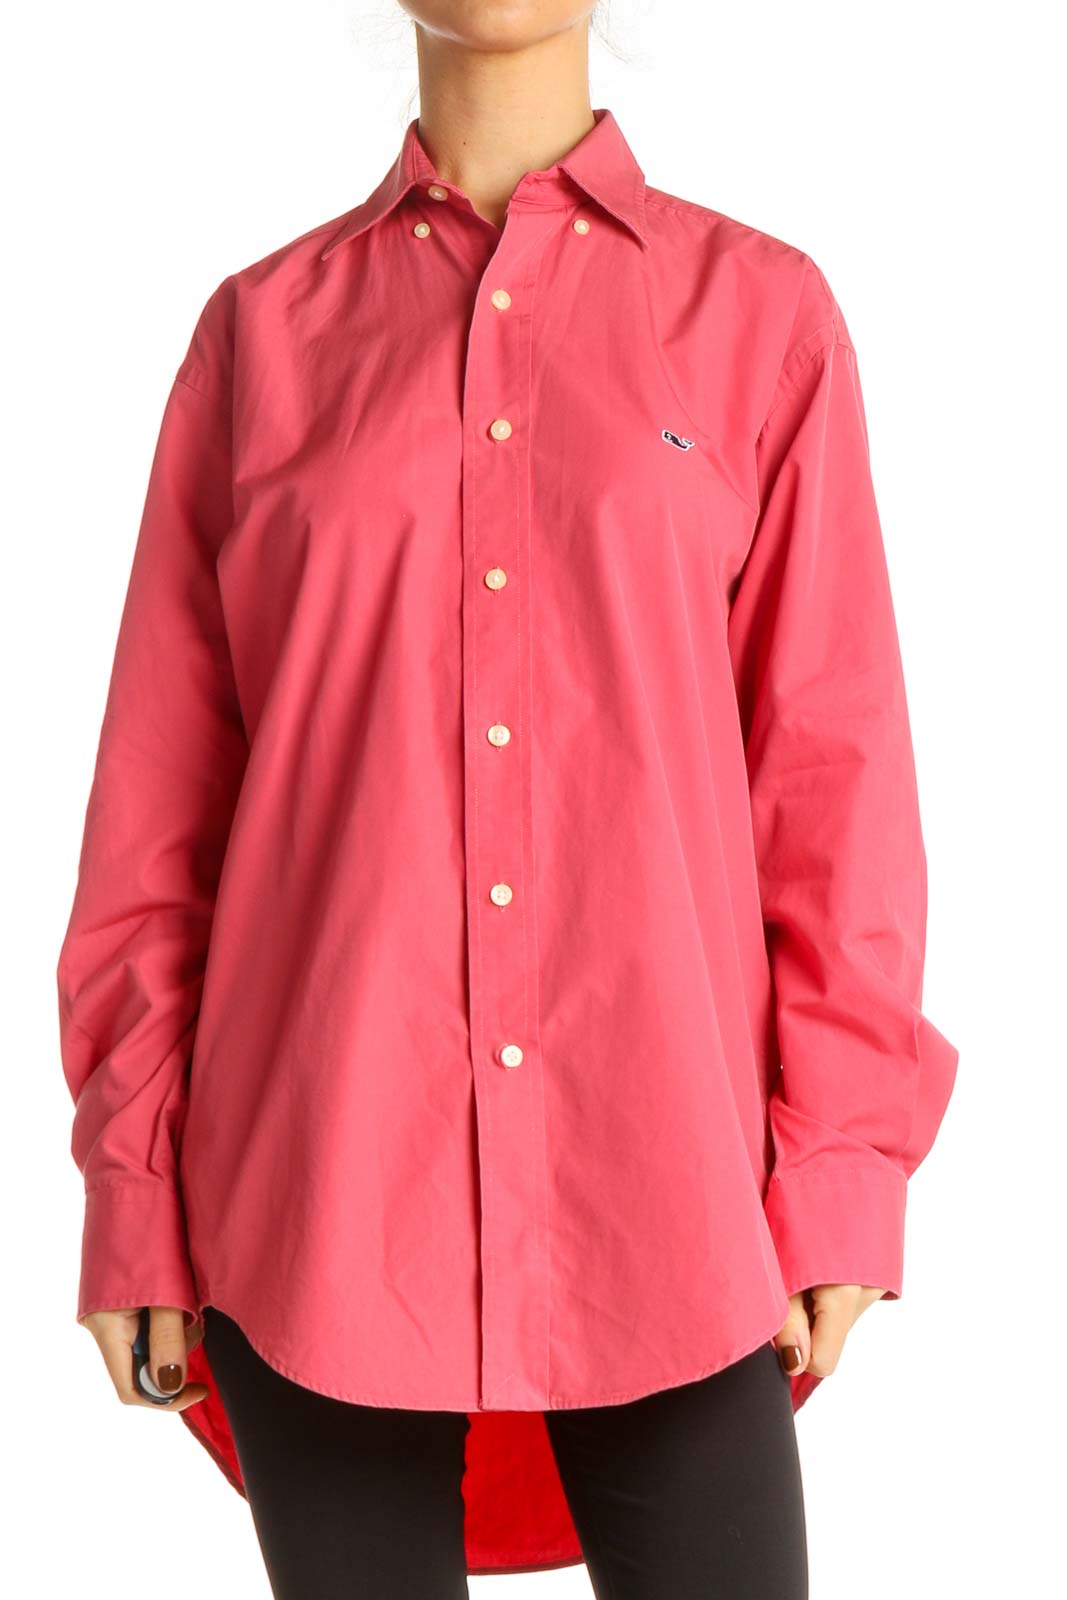 Pink Solid Formal Shirt Front